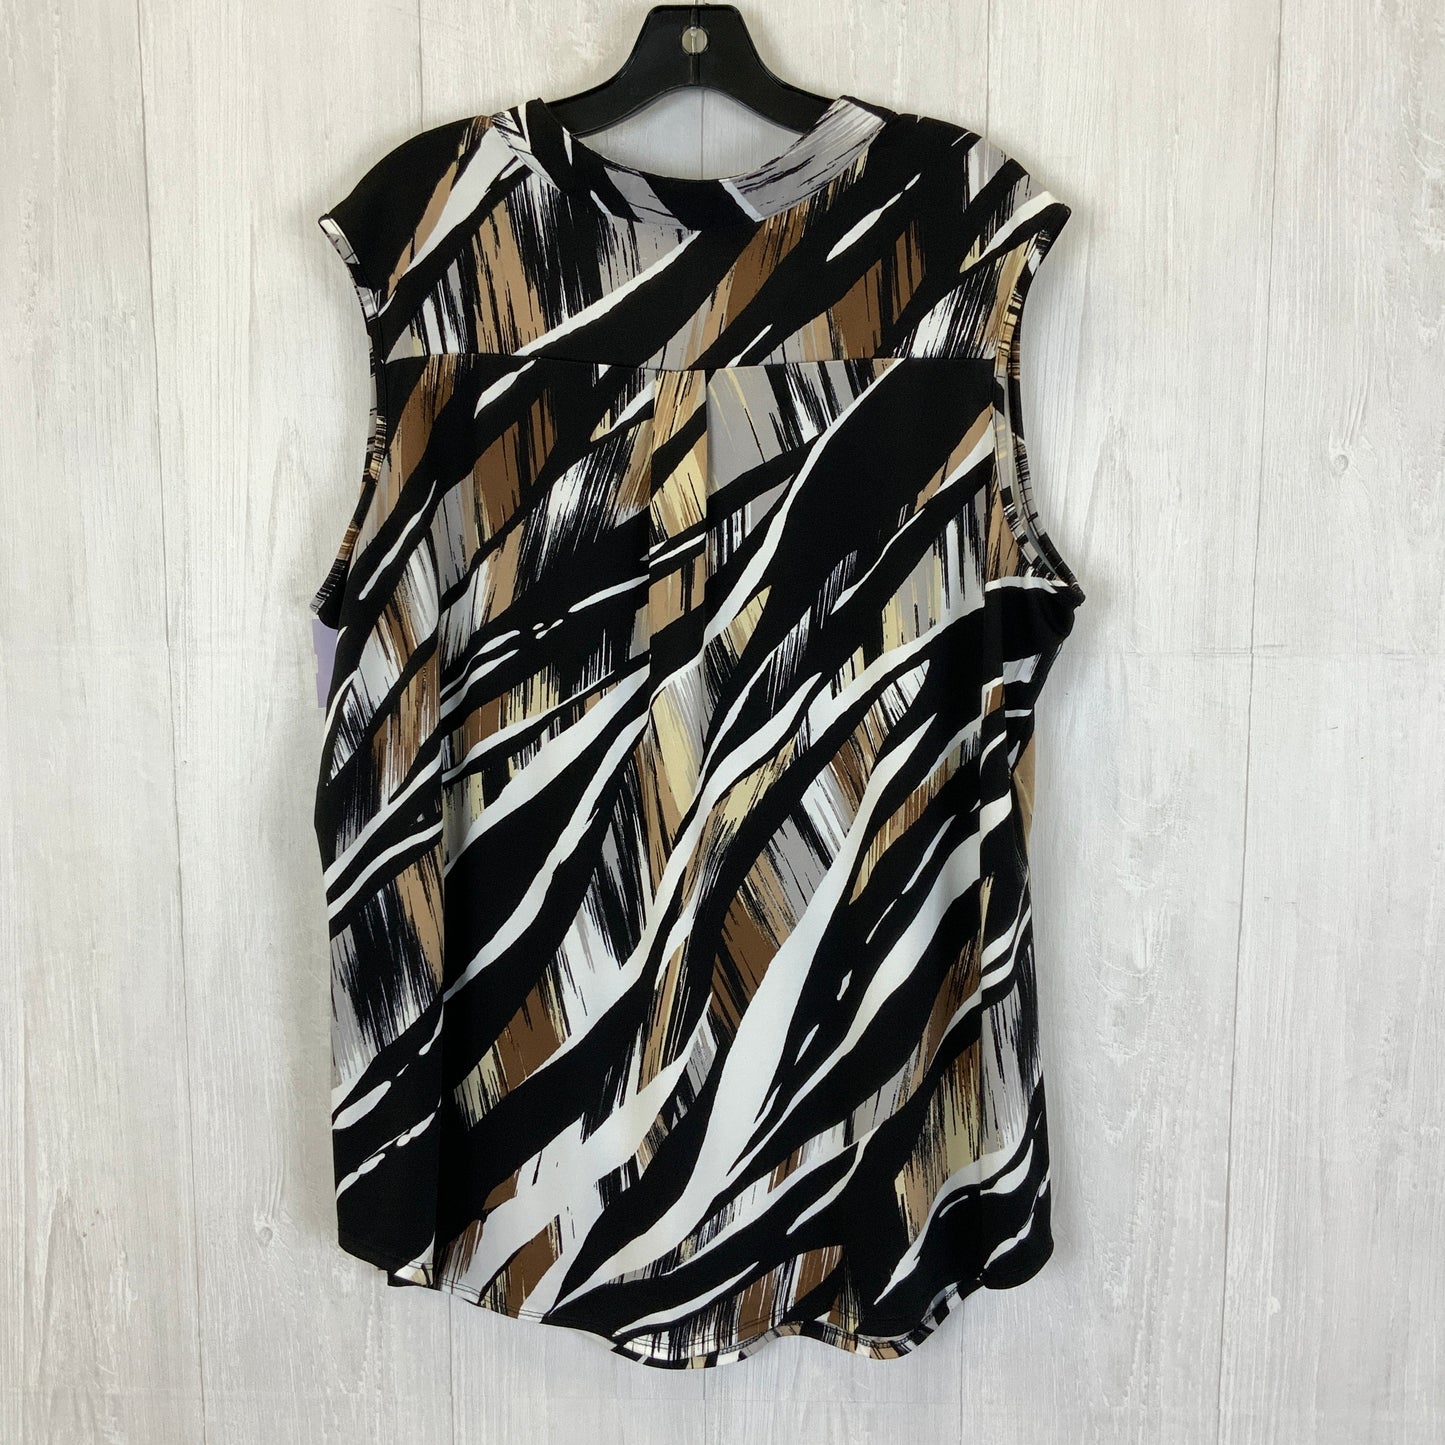 Black & Brown Top Sleeveless Perseption Concept, Size 2x